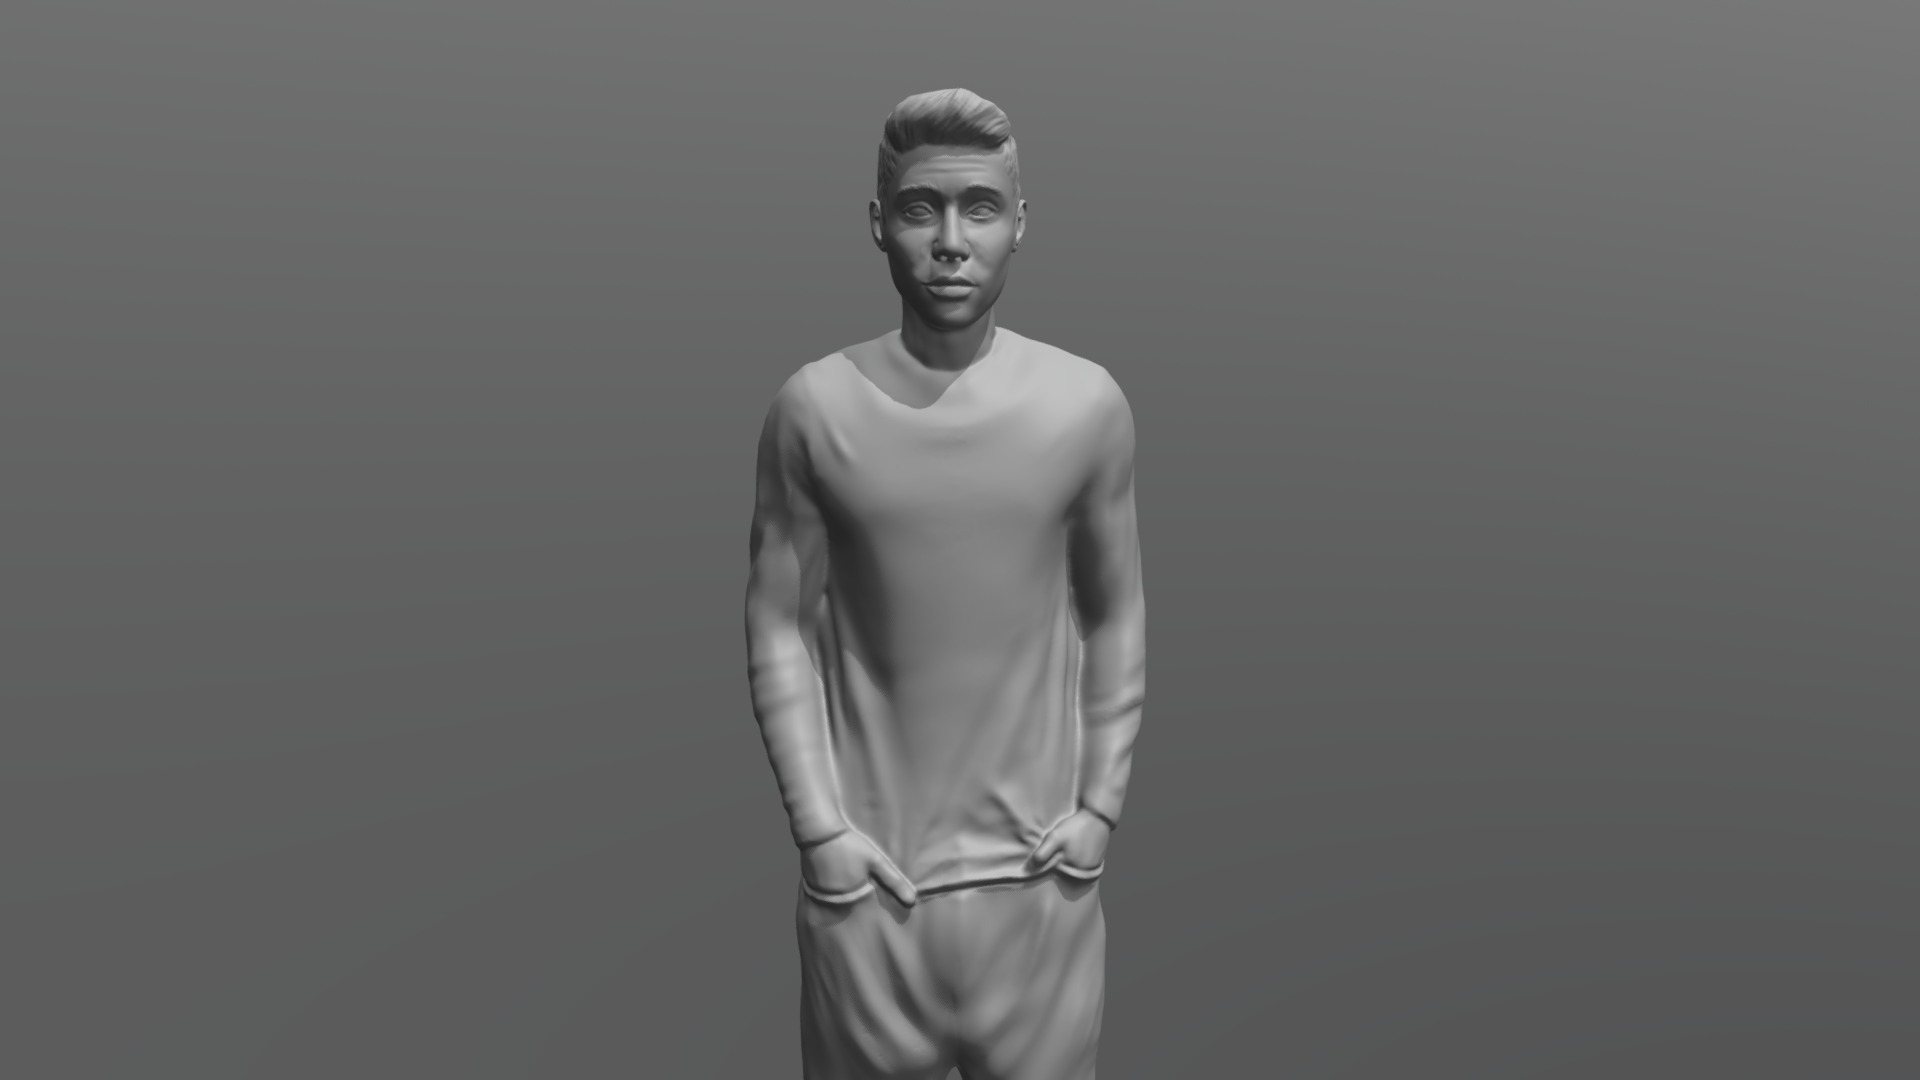 3D model Justin Bieber for 3D printing - This is a 3D model of the Justin Bieber for 3D printing. The 3D model is about a person posing for a picture.